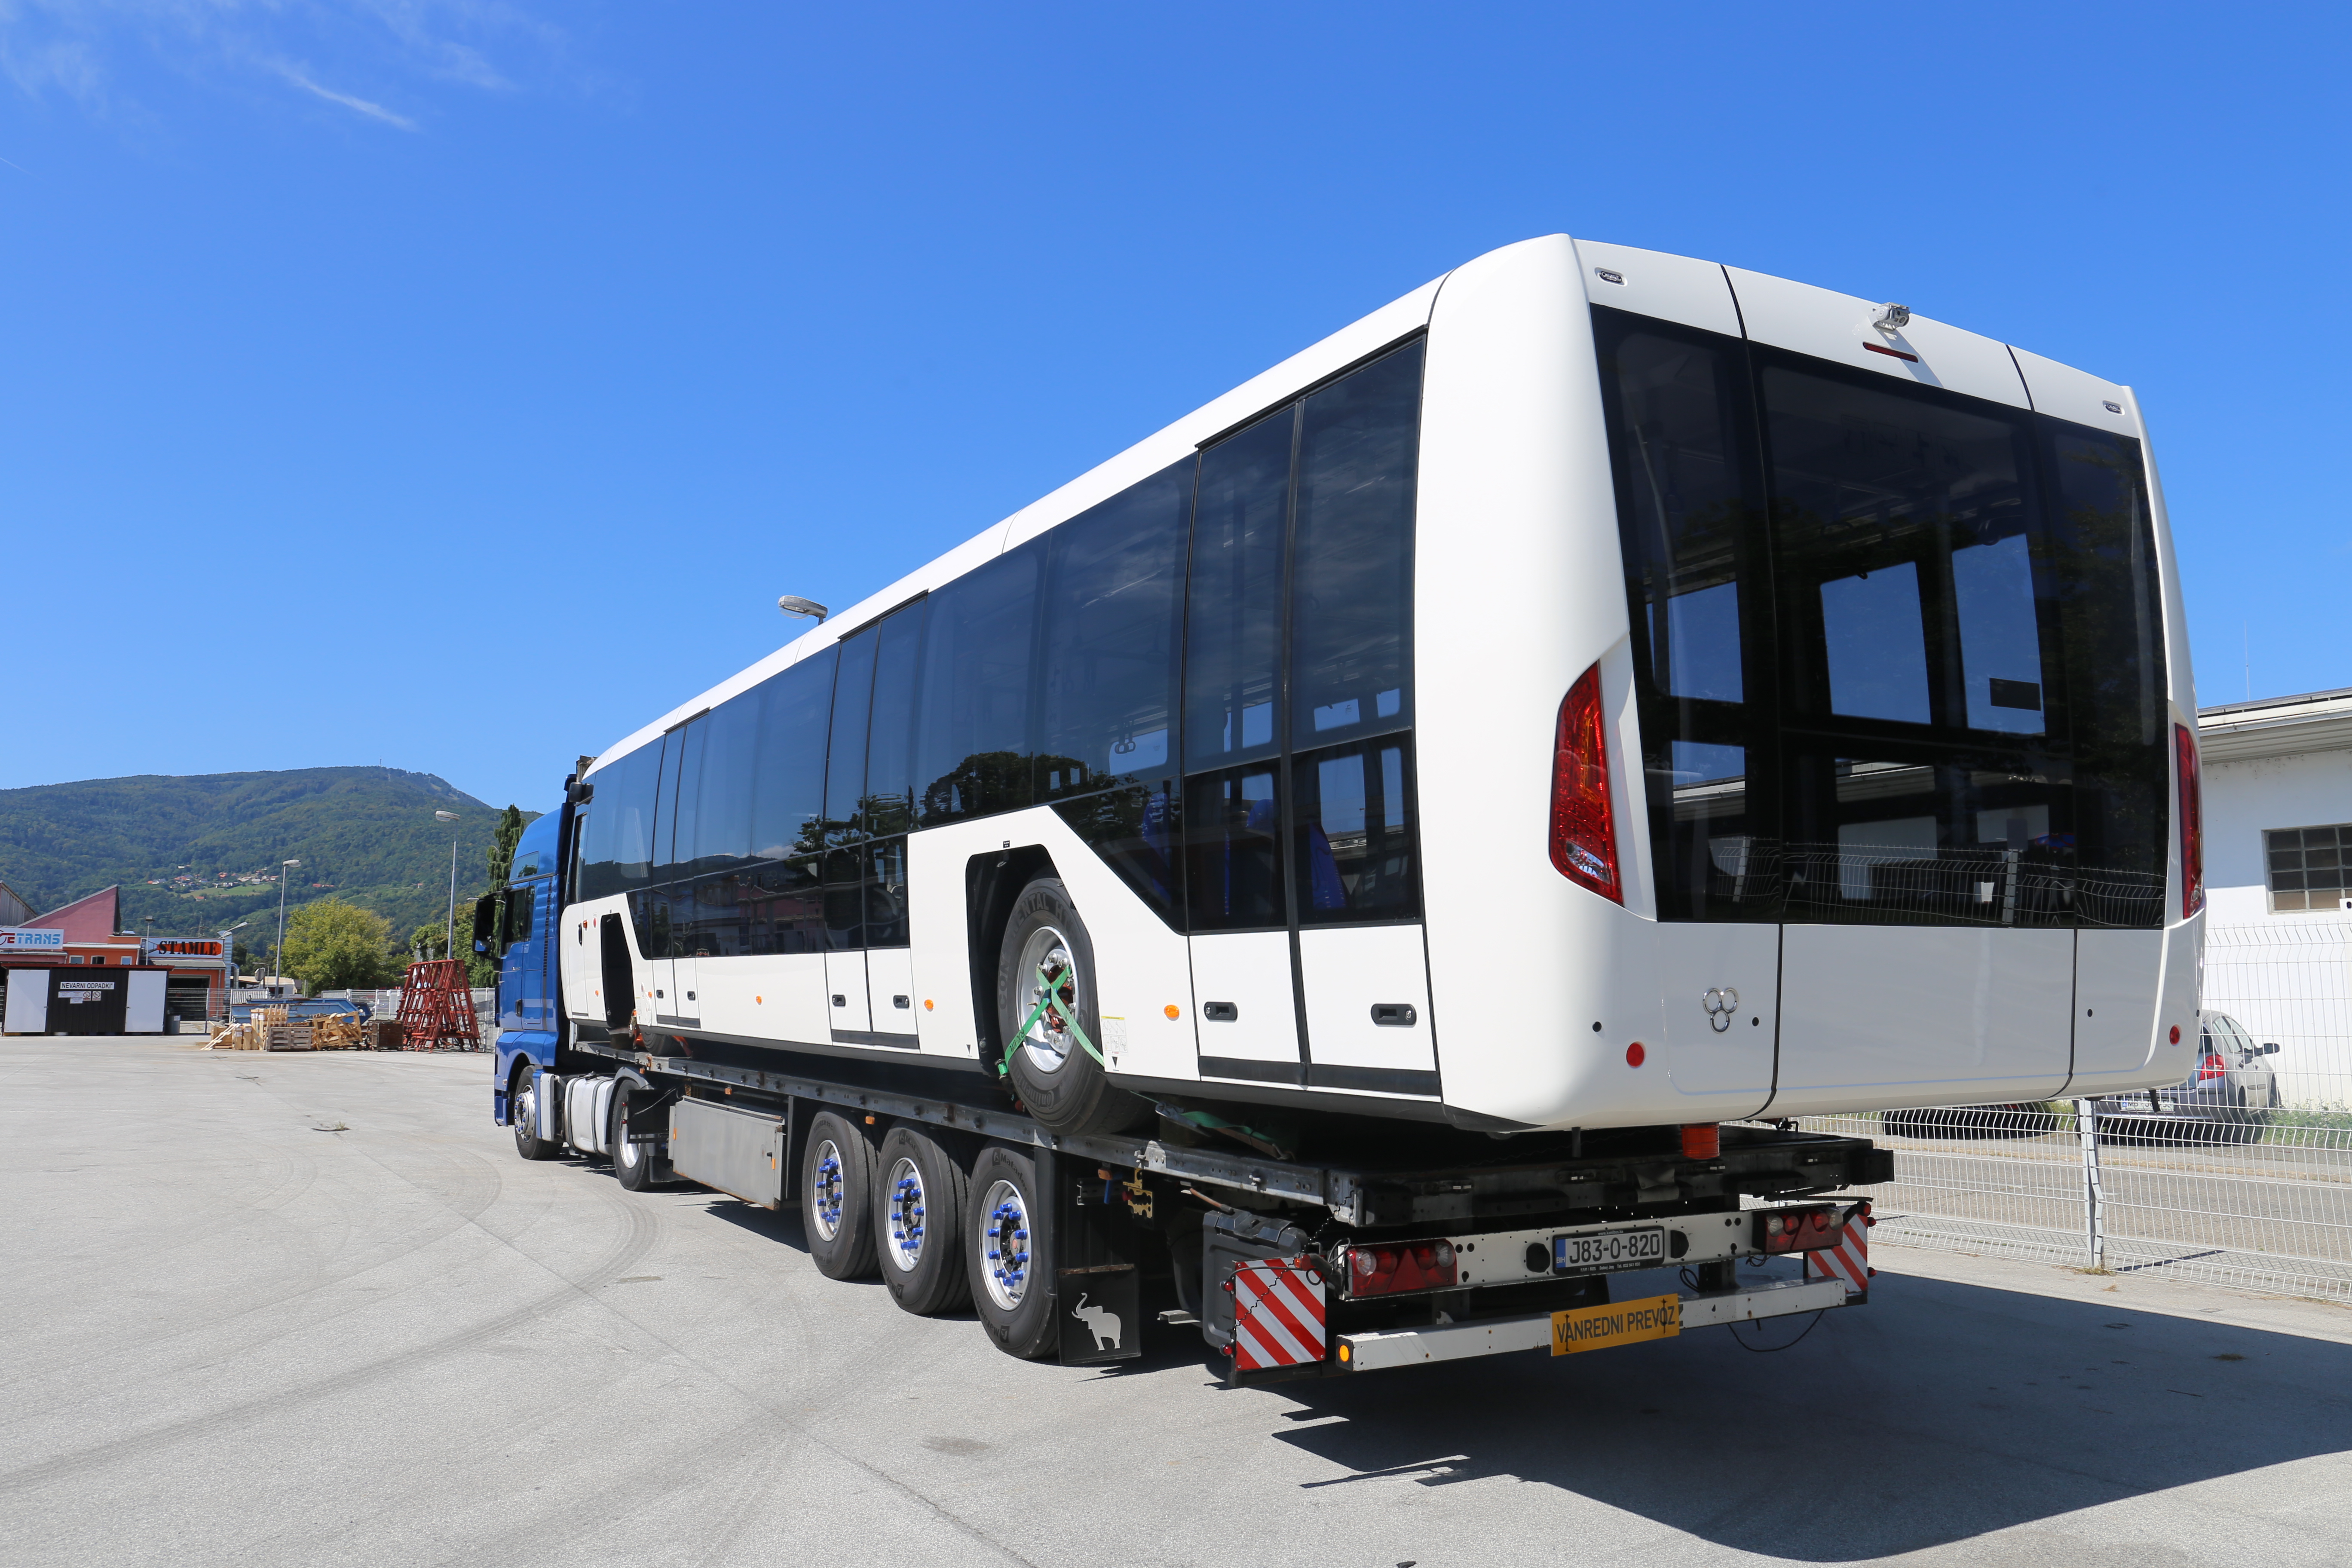 VIVAIR2 - electric airport bus is already on its way to more than 4.000 kilometers remote city of Basra, the second largest international airport in Iraq.